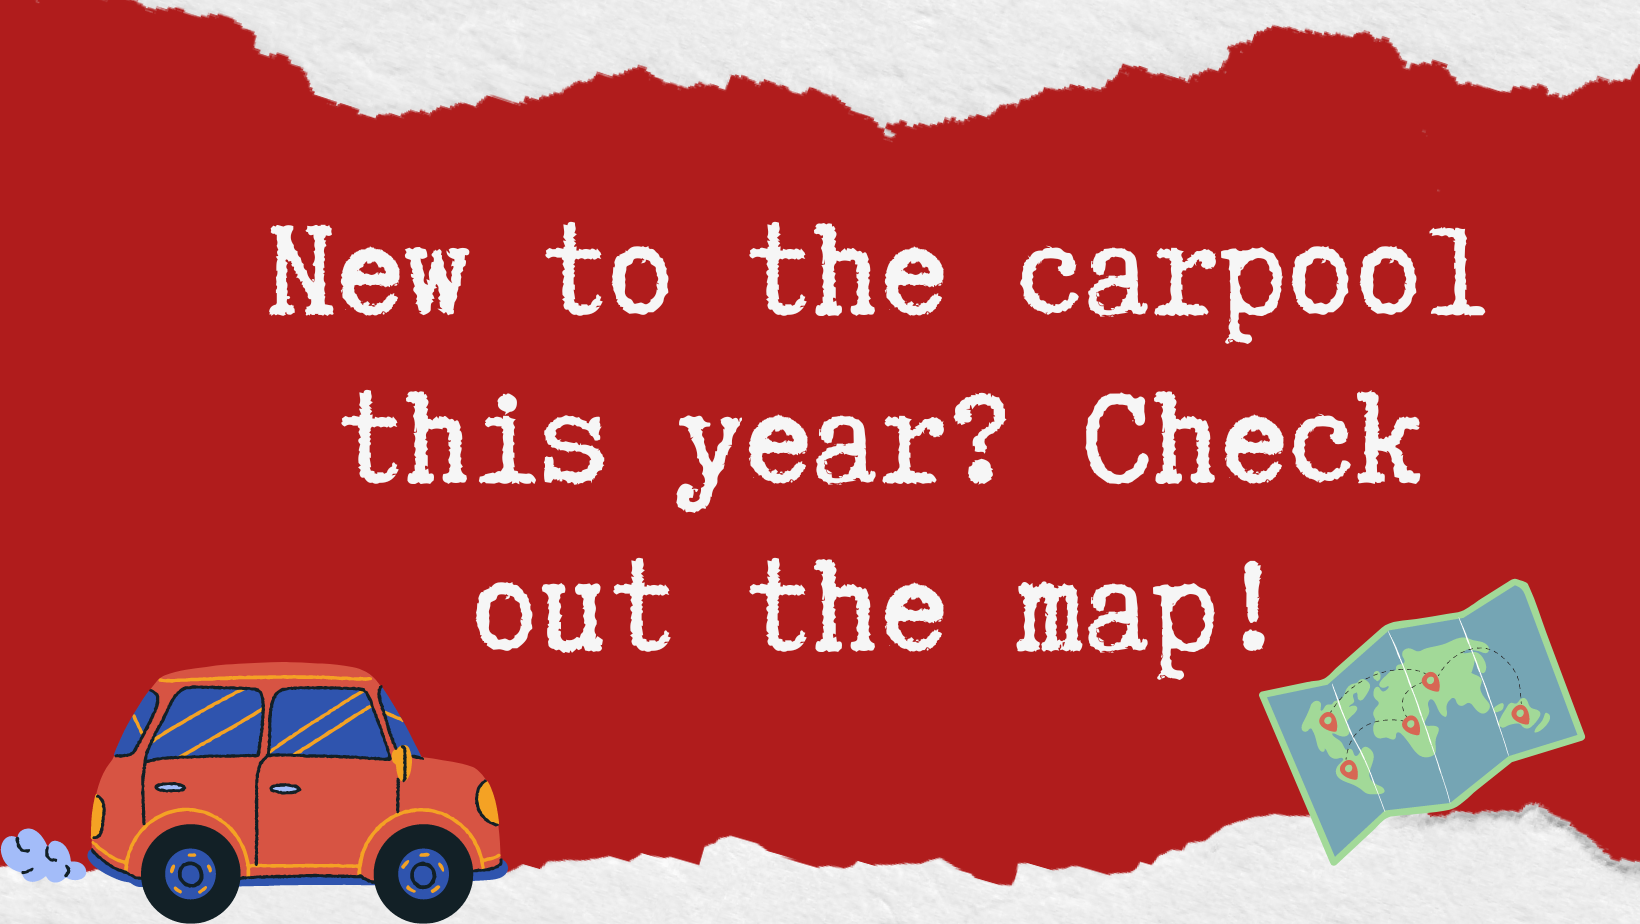 New to Carpool this year? Check out the map!